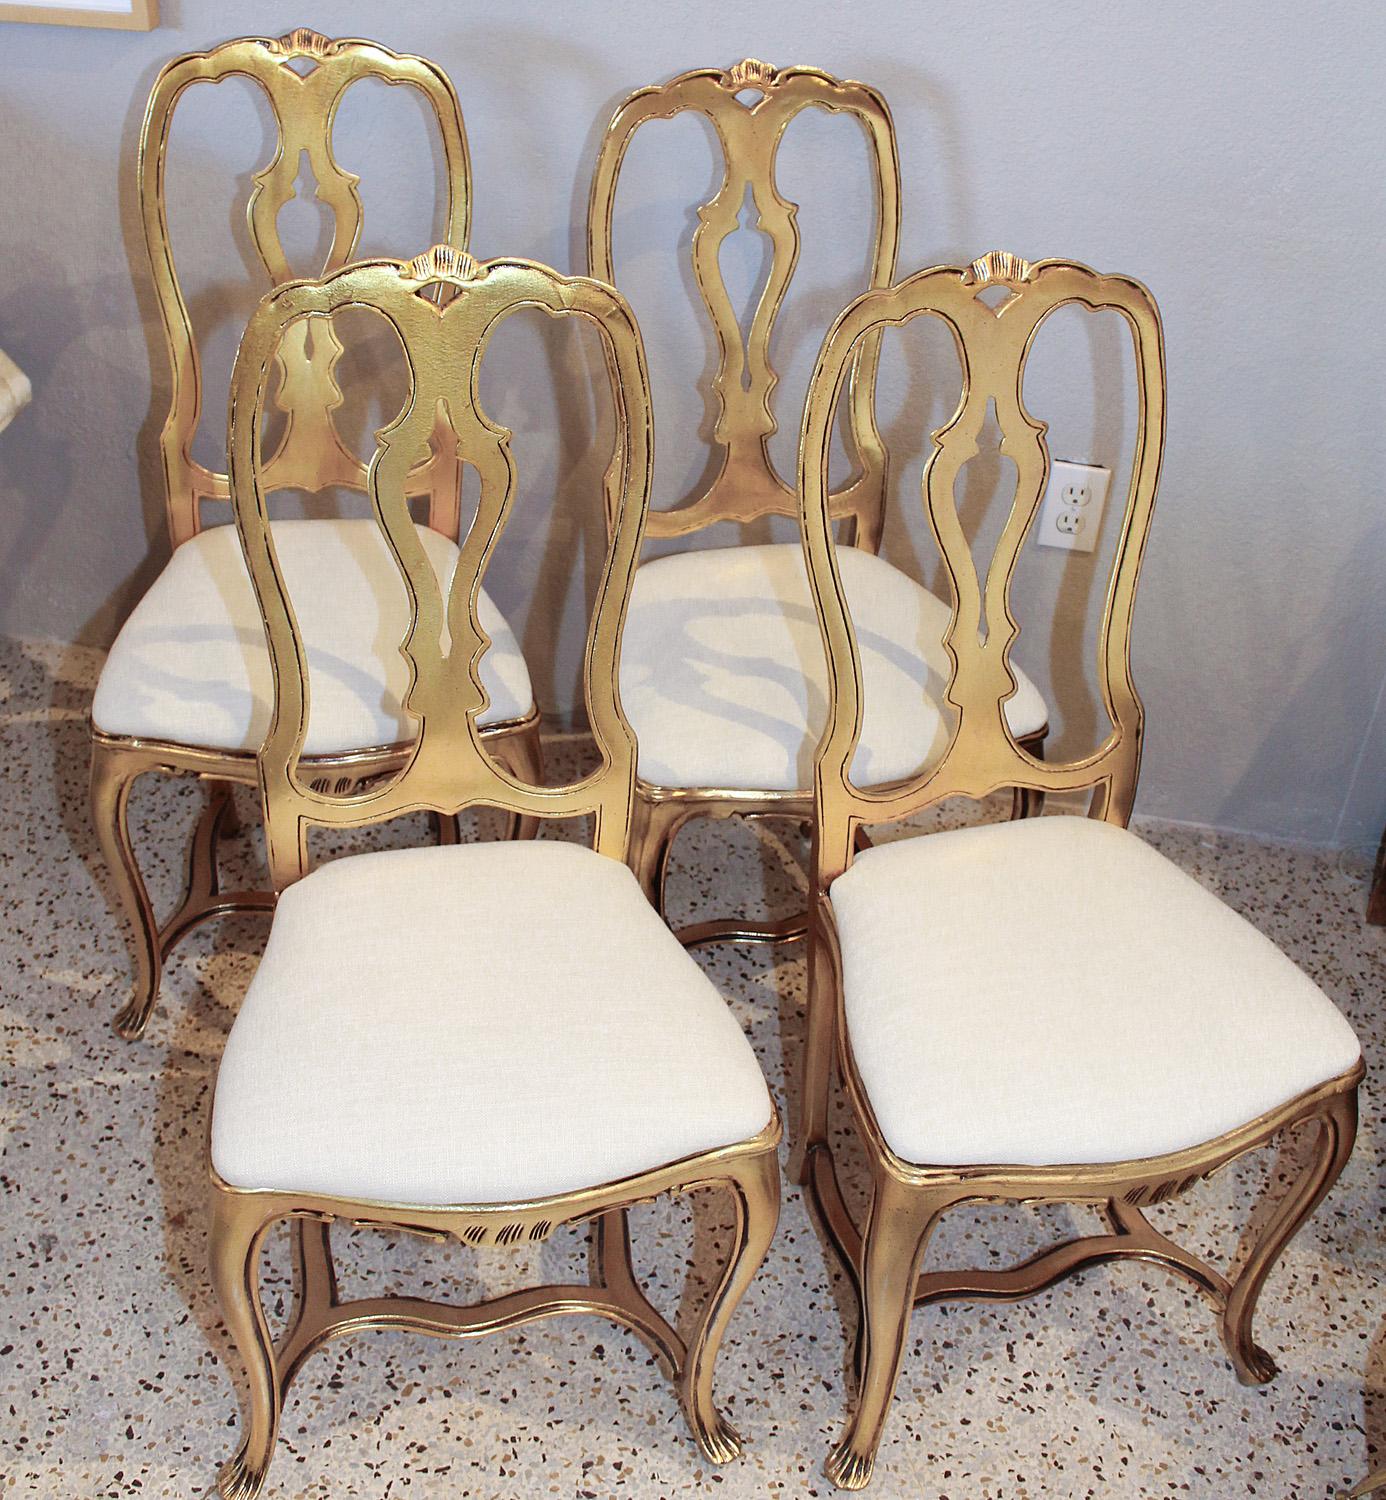 court chairs for sale